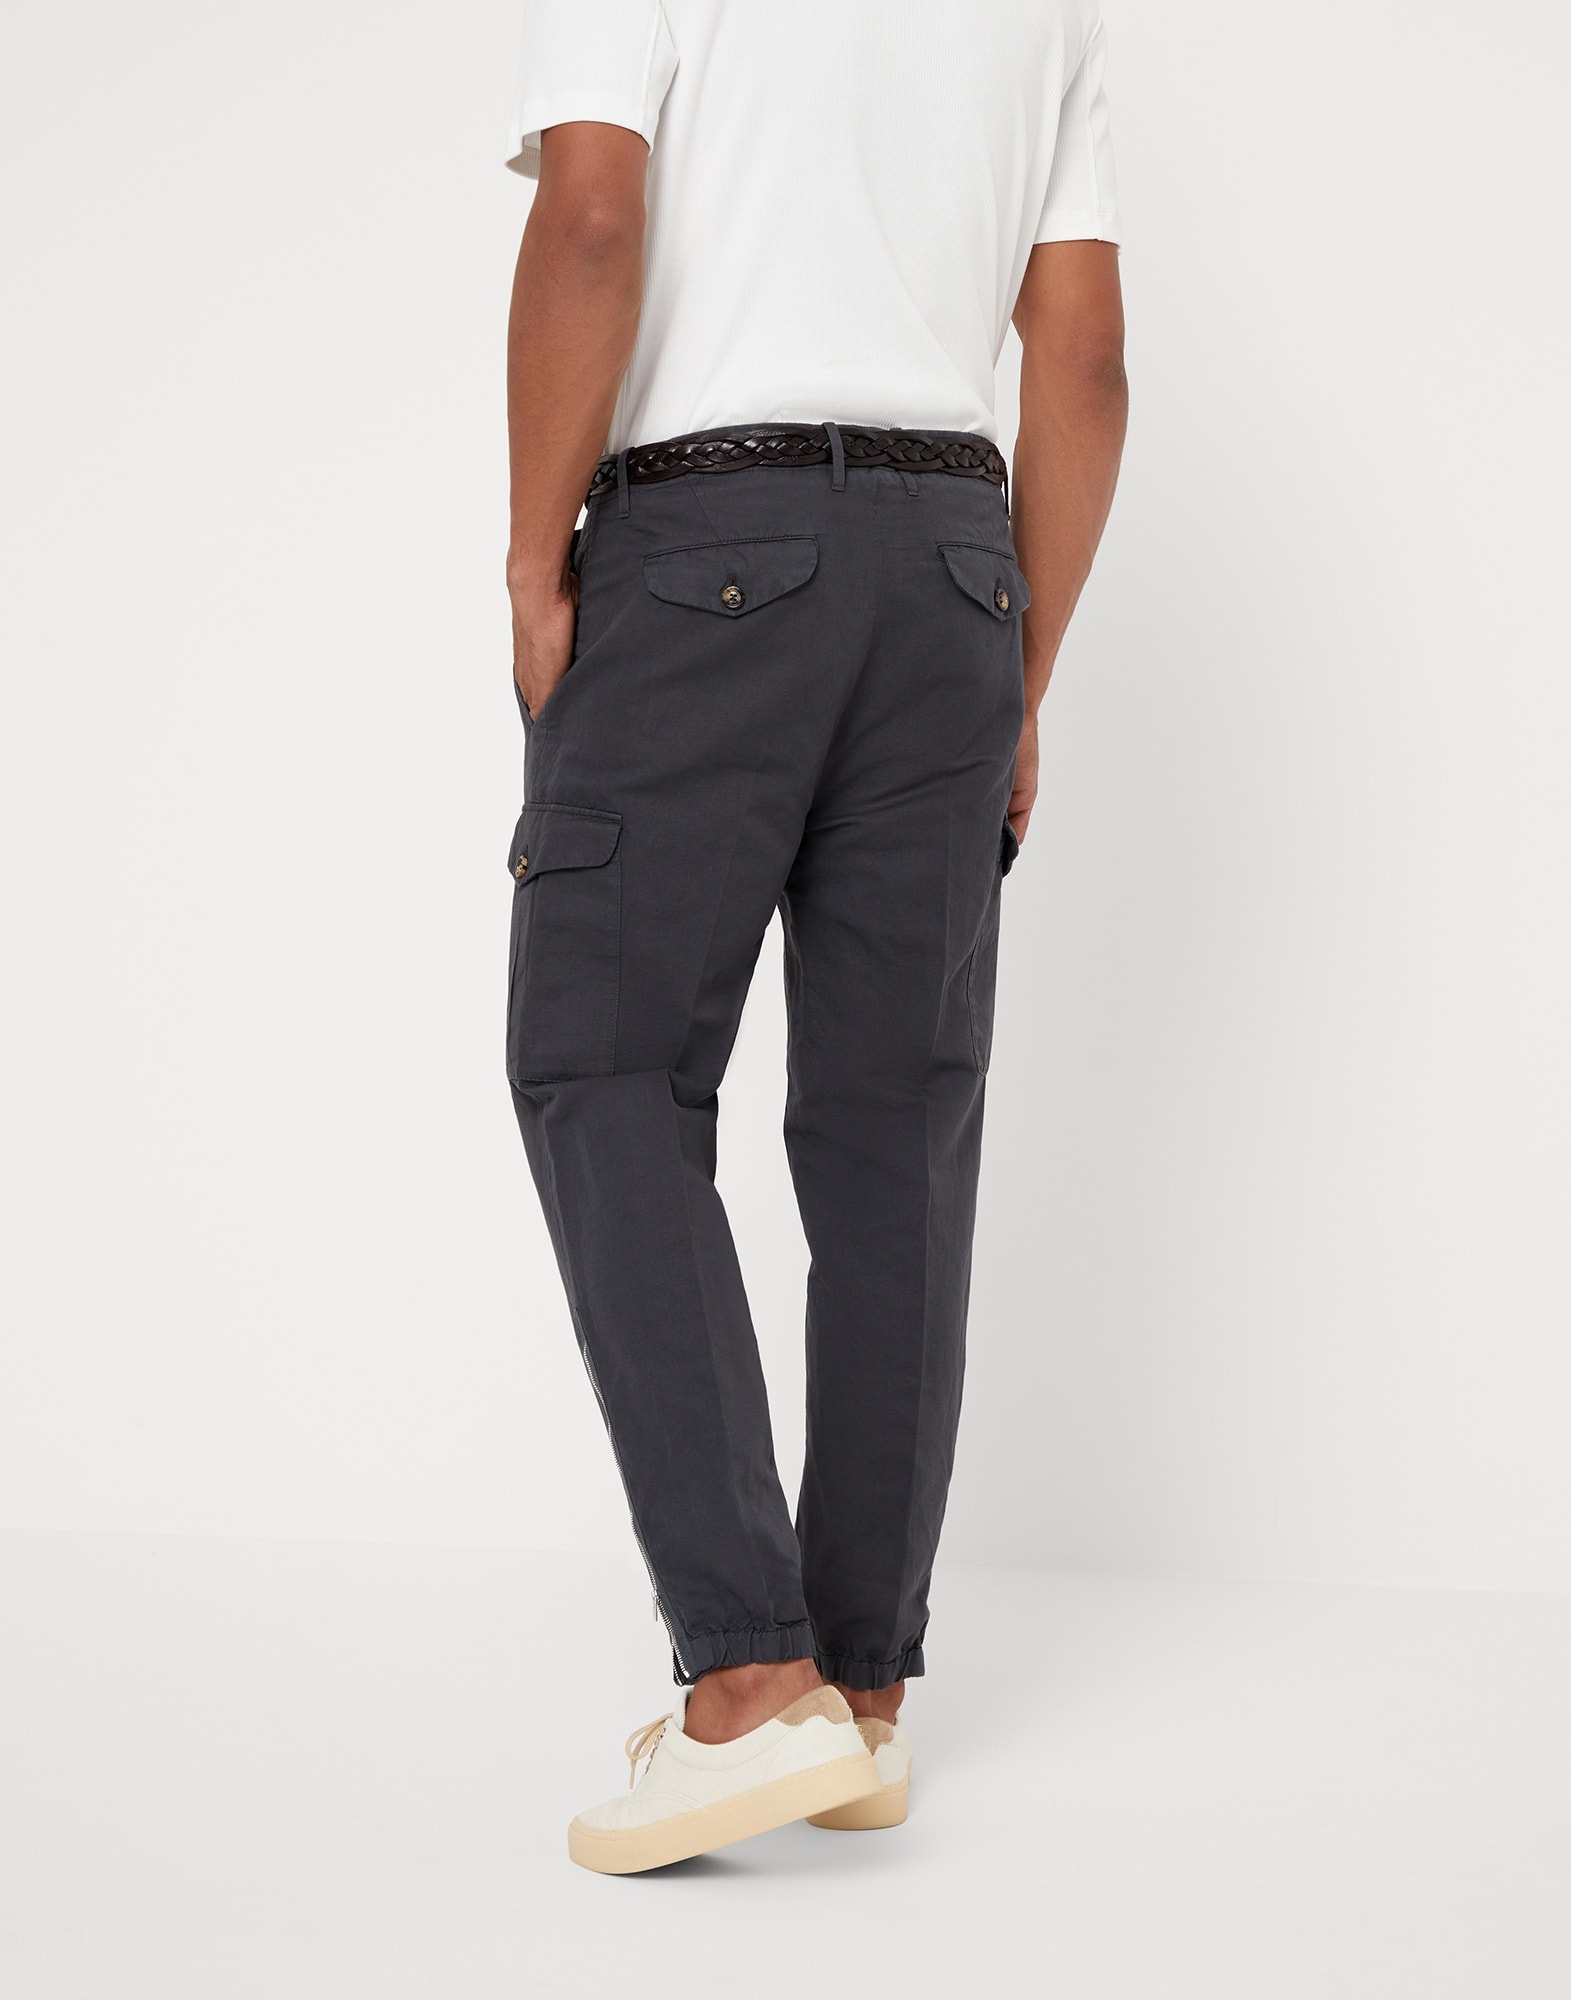 Garment-dyed ergonomic fit trousers in twisted linen and cotton gabardine with pleats, cargo pockets - 2